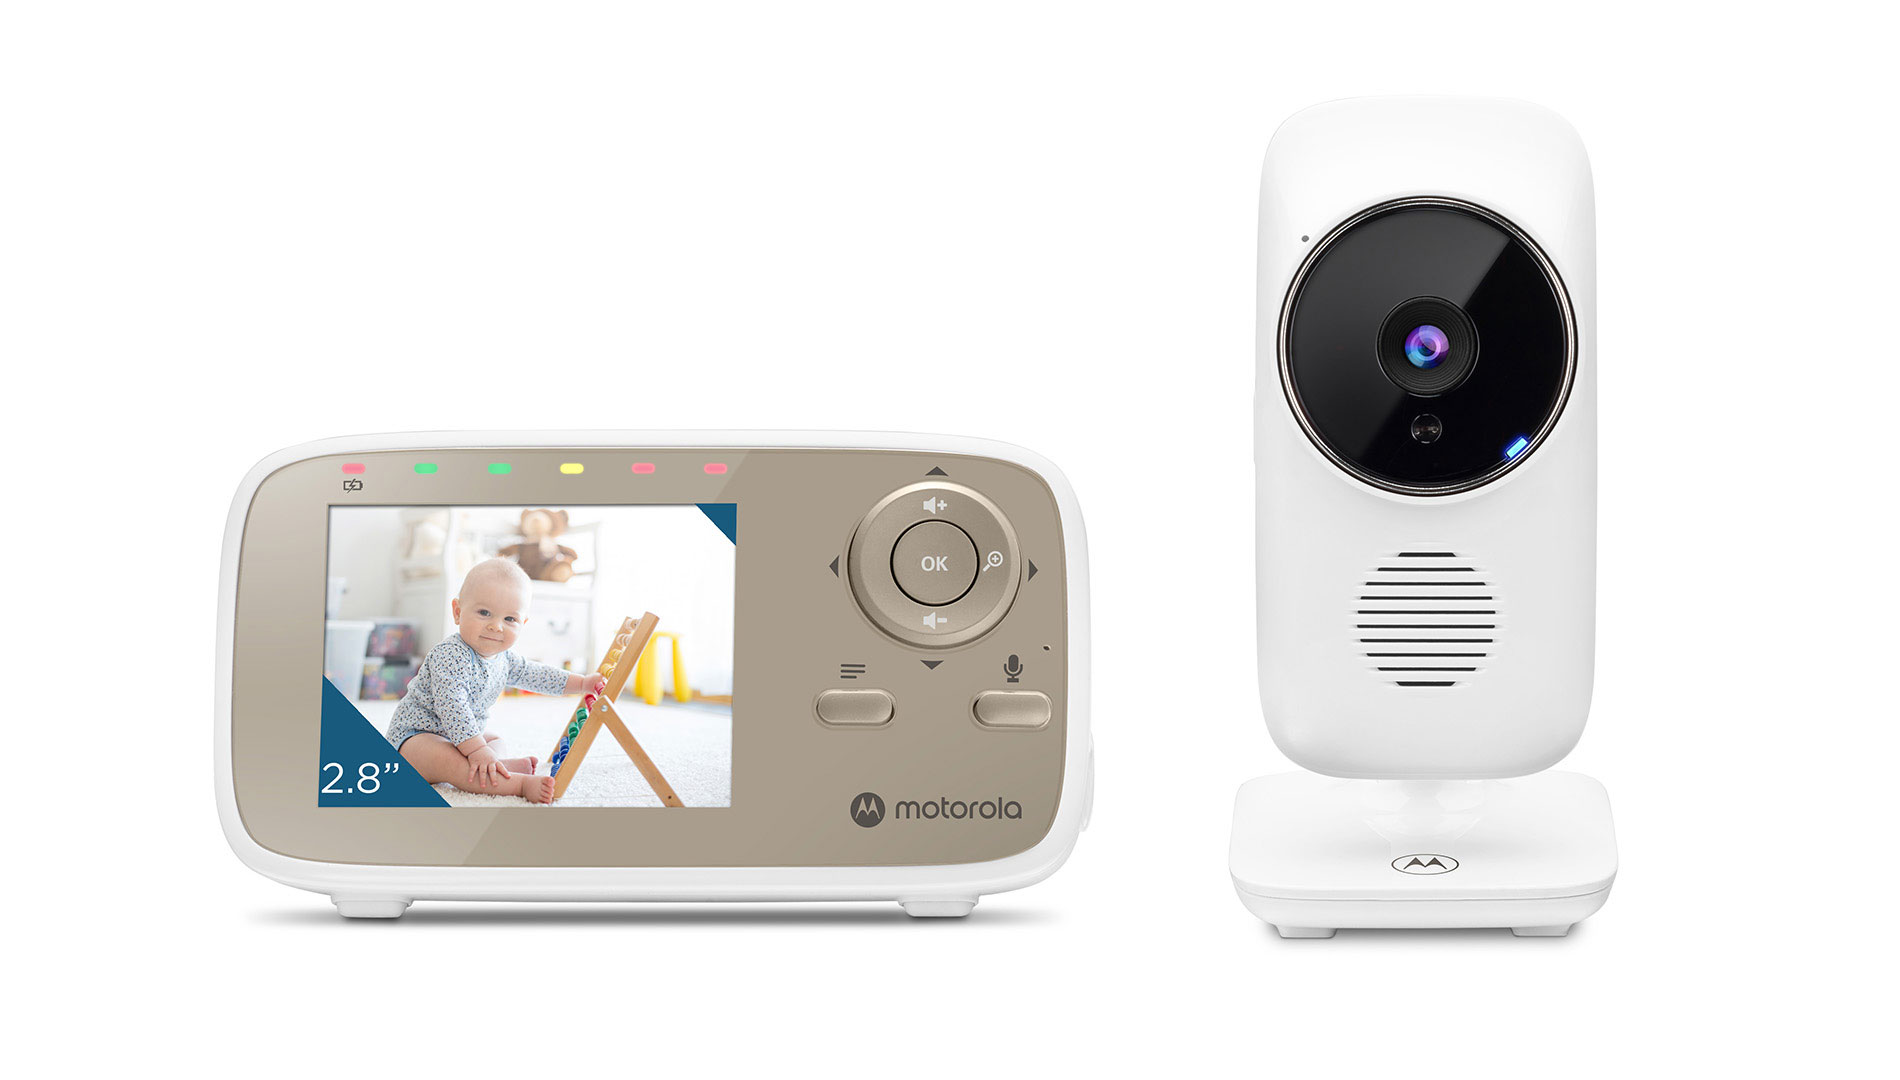 VM483 2.8 inch Video Baby Monitor - Product image